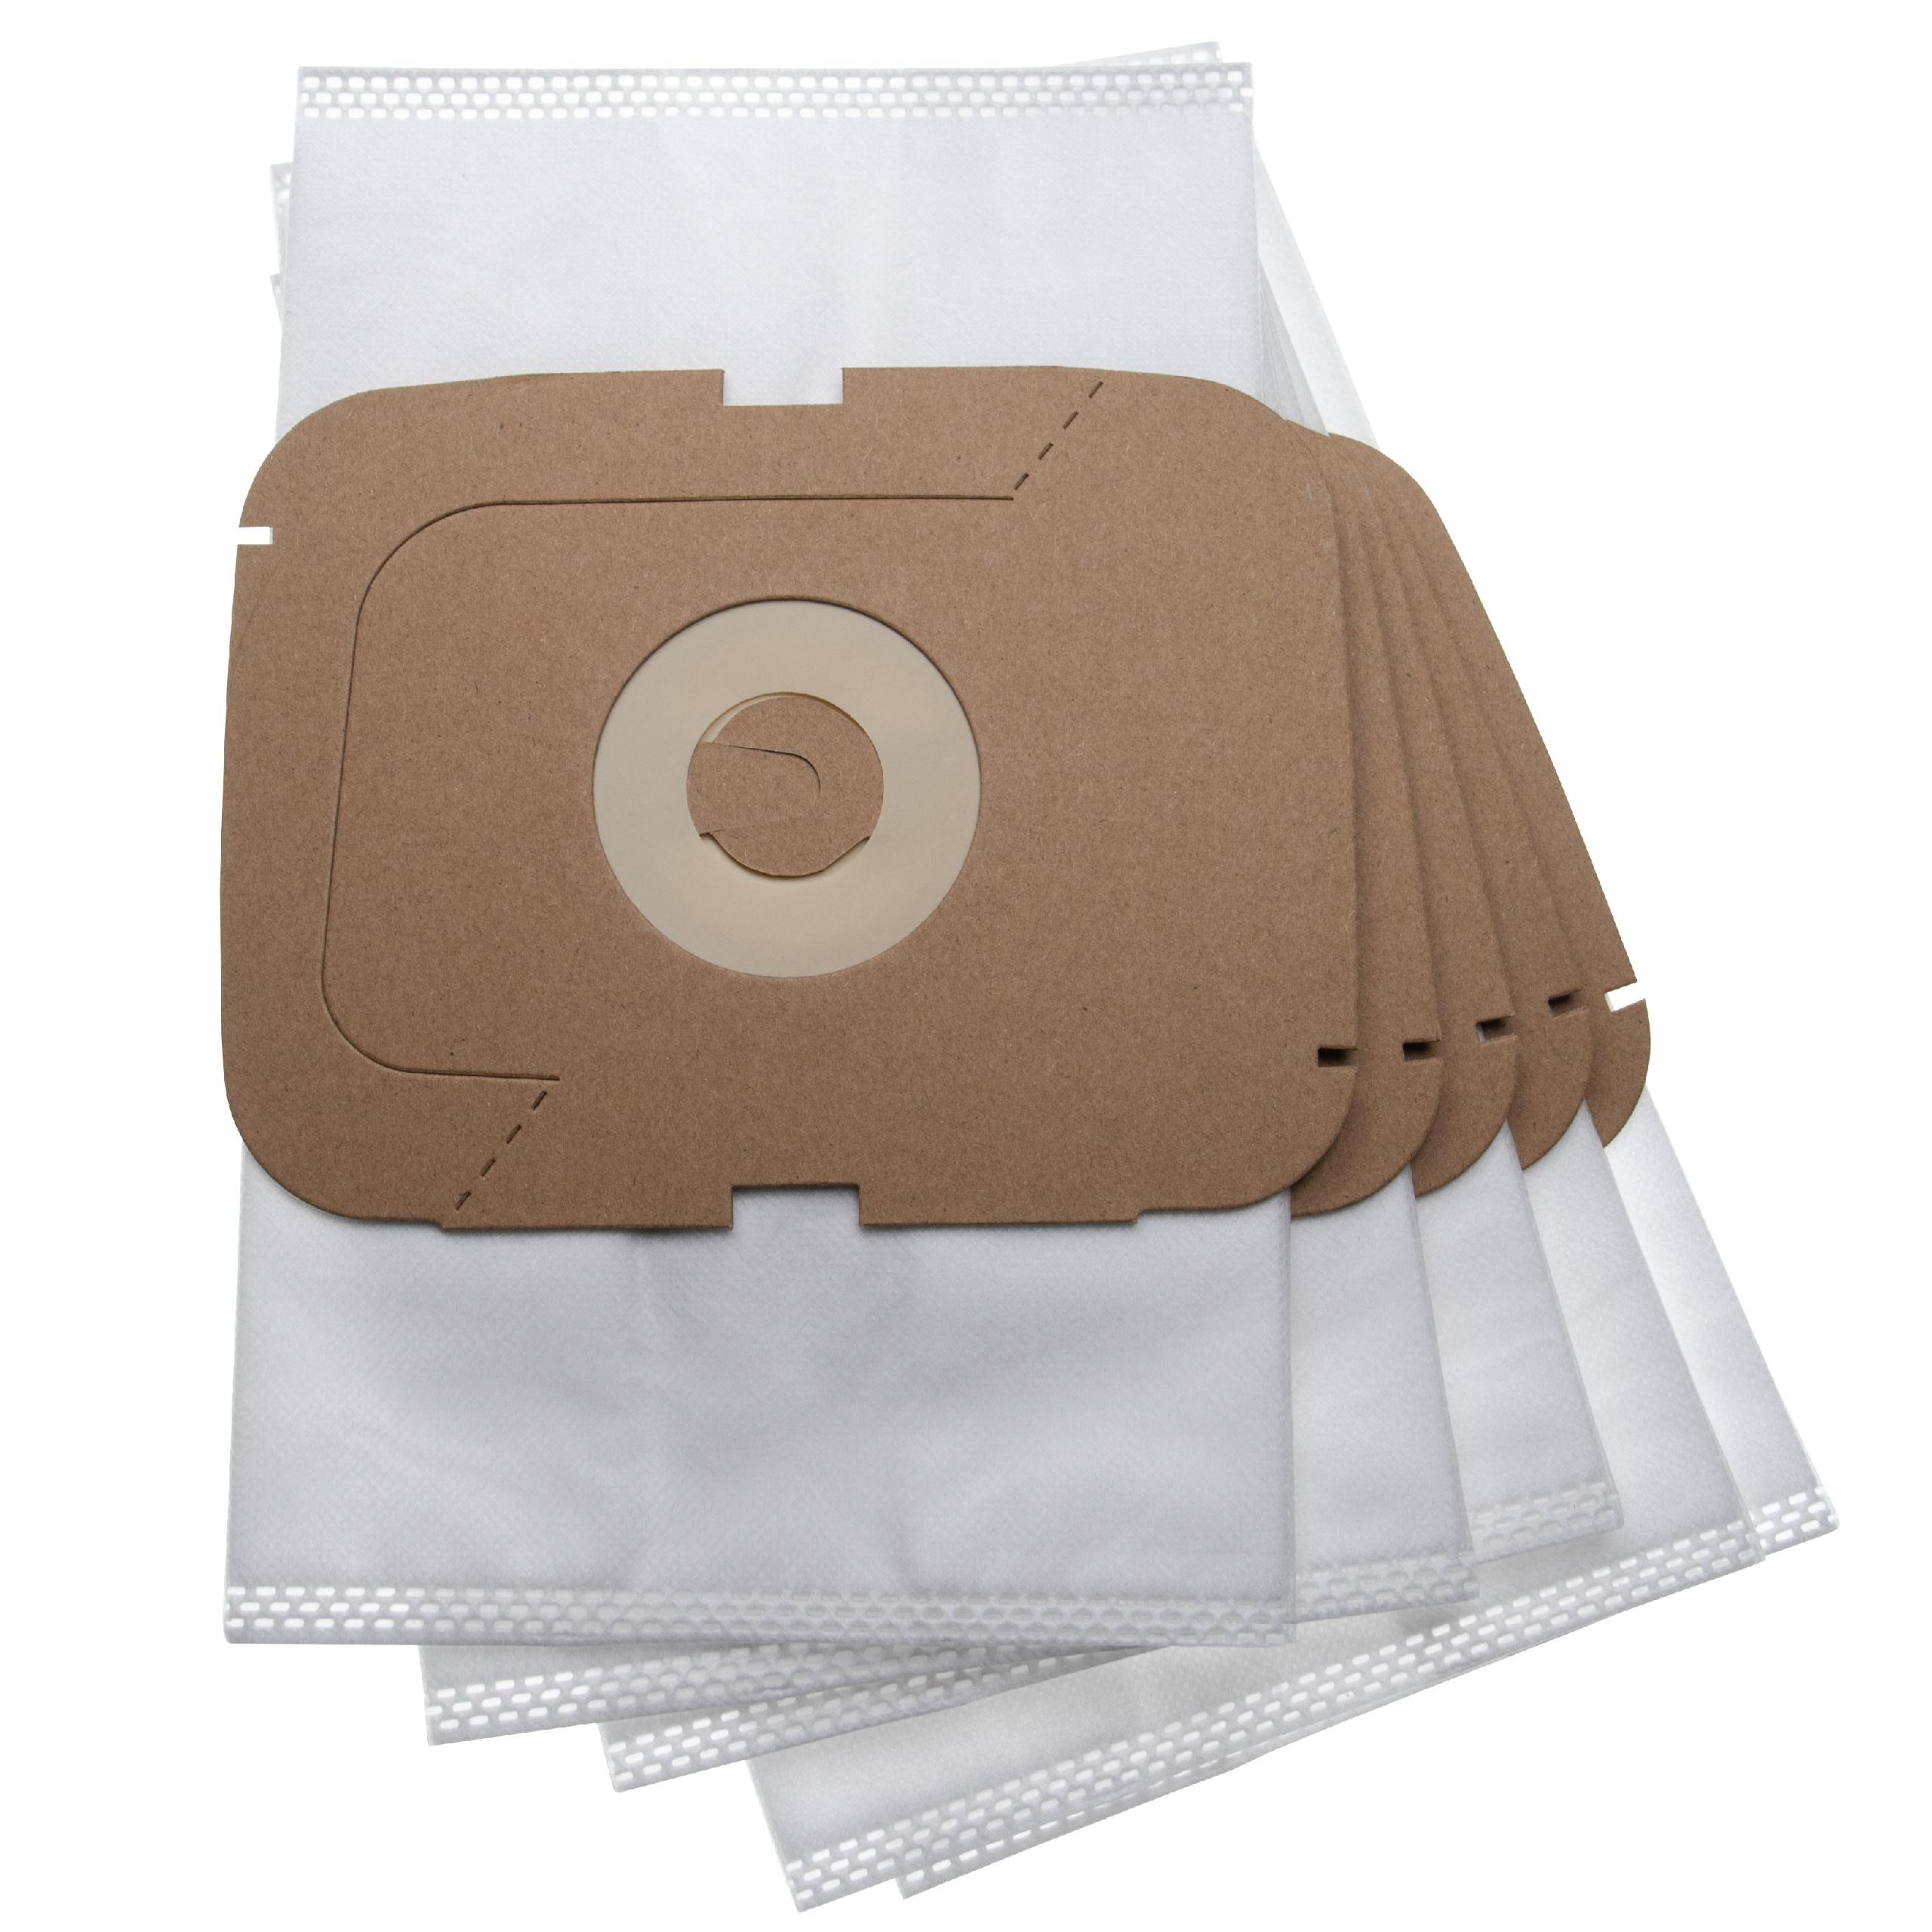 5x Vacuum Cleaner Bag replaces Lux 111000150 for Lux - microfleece